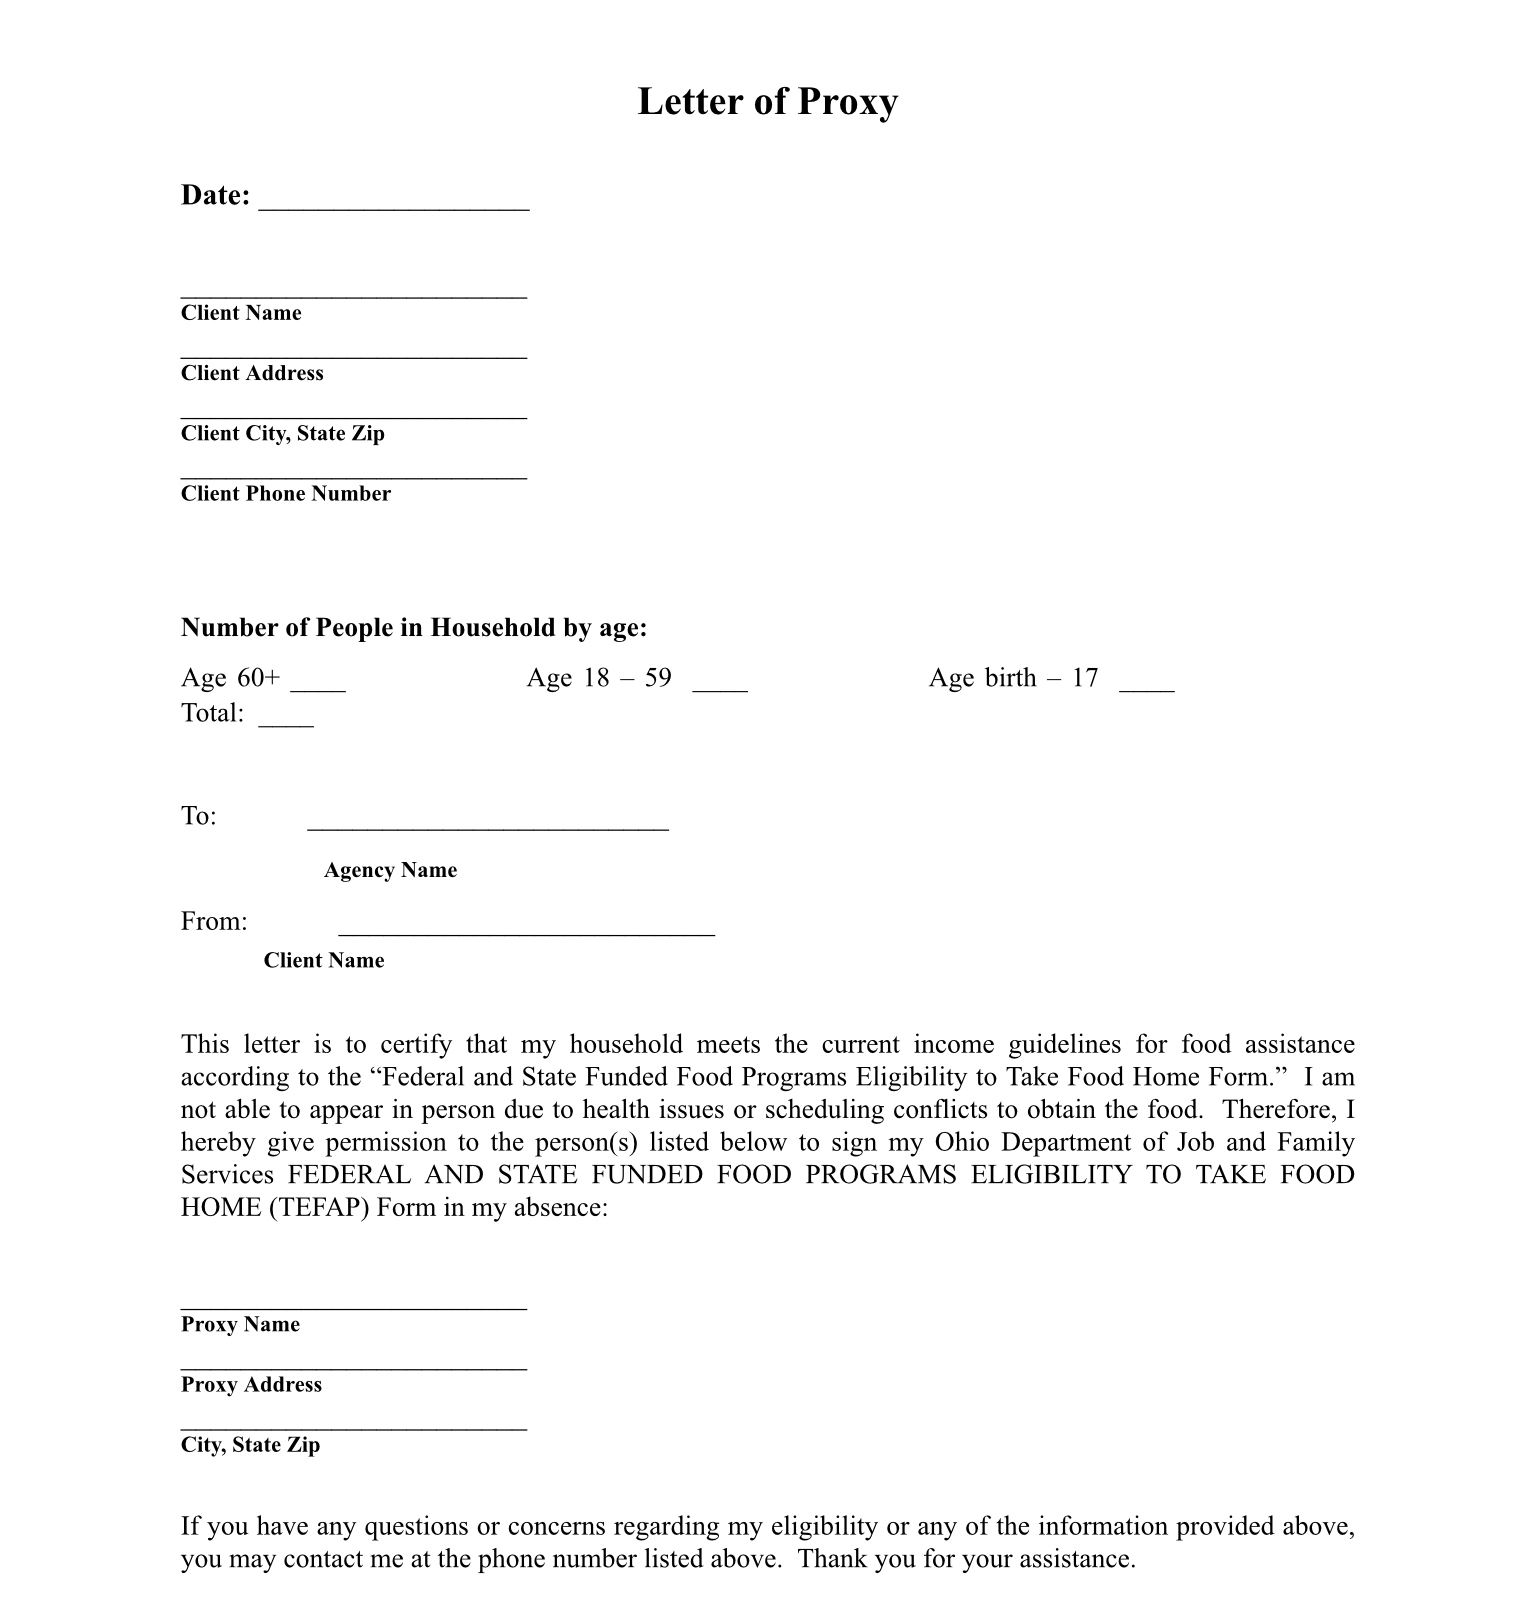 Proxy Form: to pickup for someone who is unable